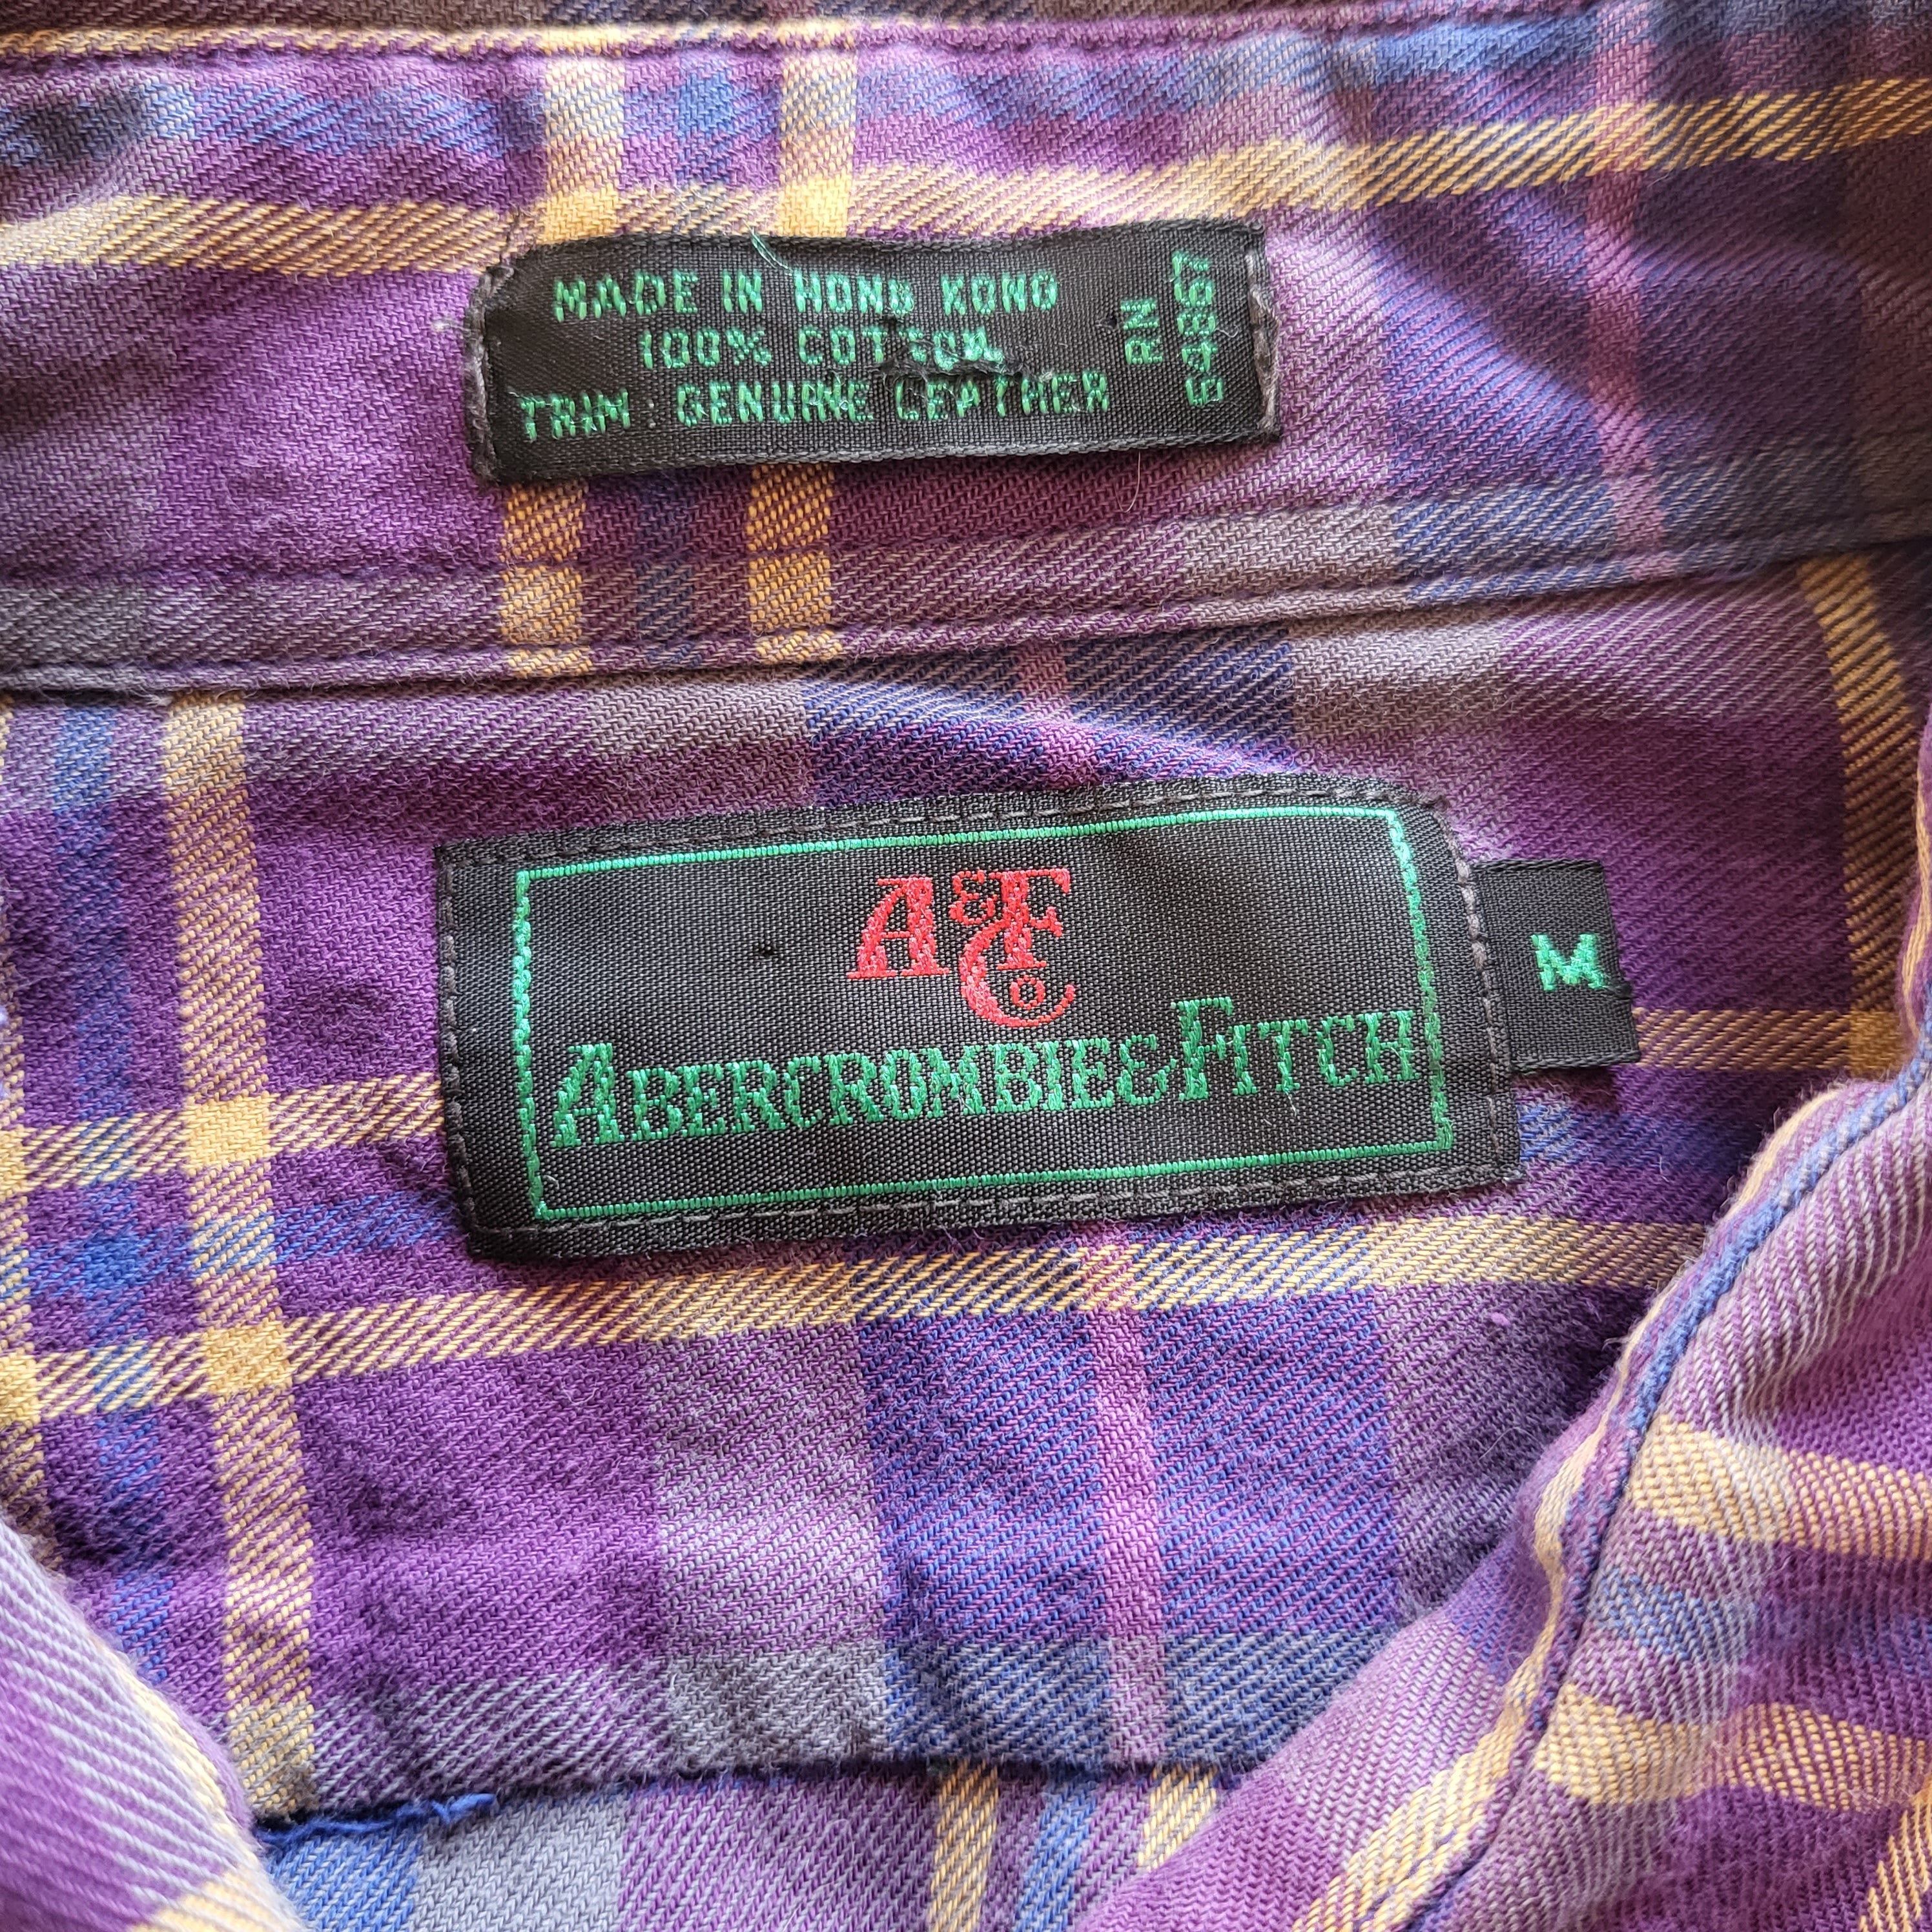 Abercrombie & Fitch 1980s Flannel